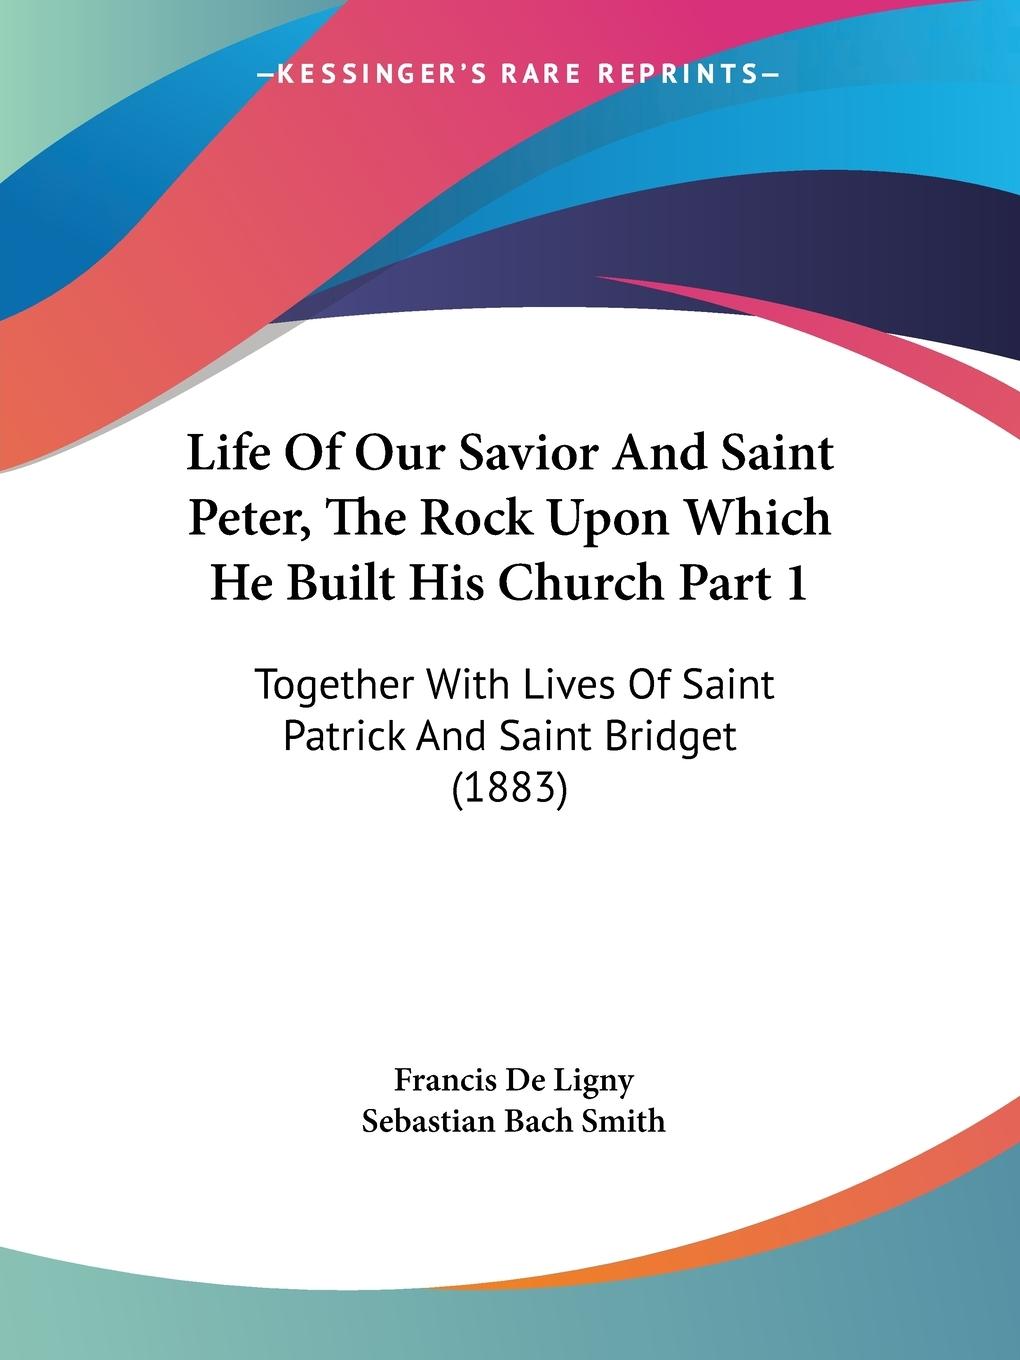 Life Of Our Savior And Saint Peter, The Rock Upon Which He Built His Church Part 1 - Ligny, Francis De Smith, Sebastian Bach